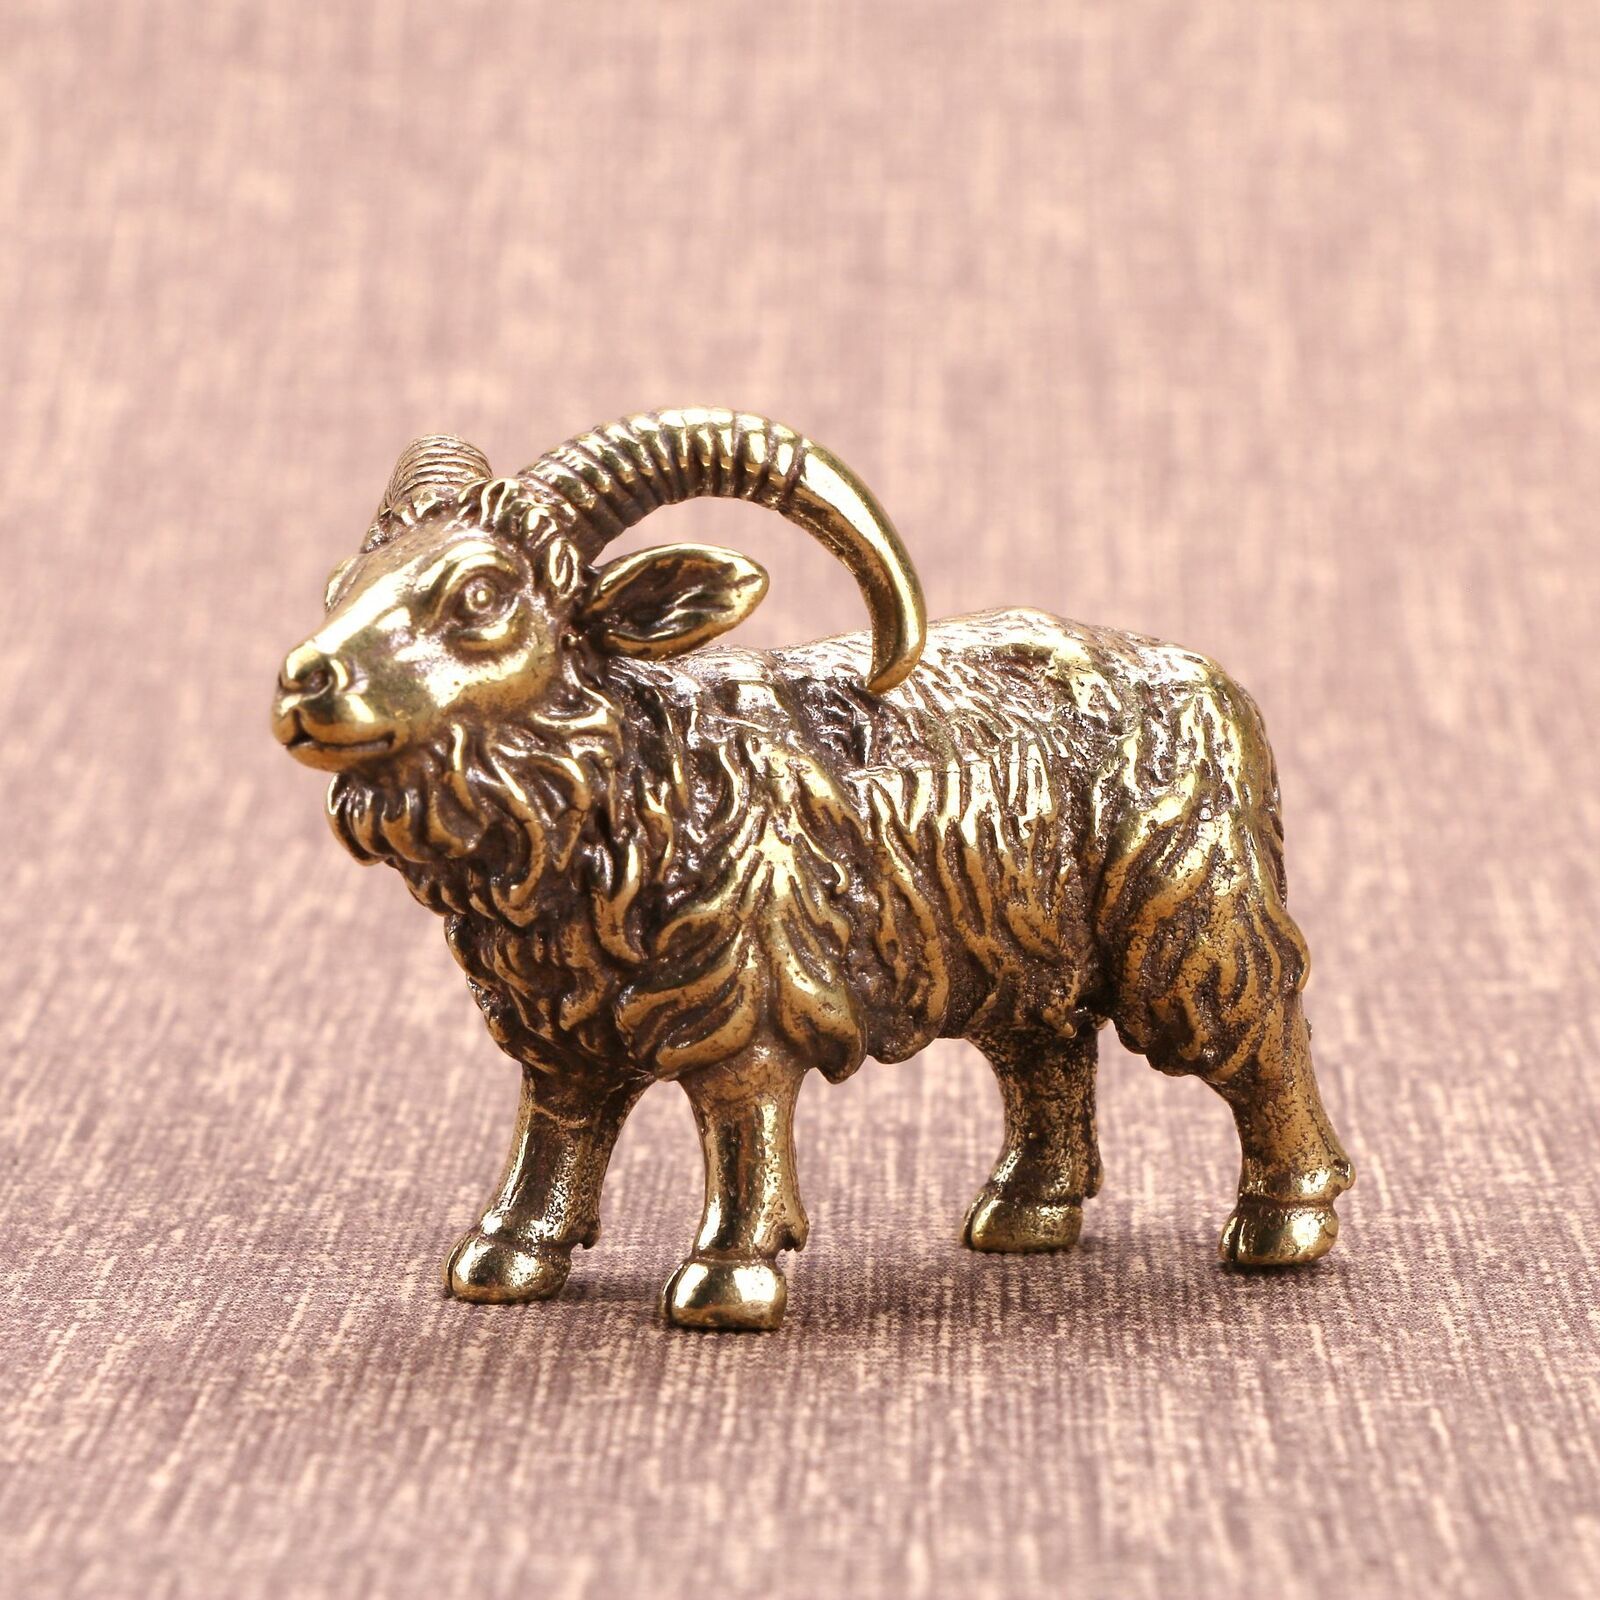 Solid Brass Goat Figurine Small Statue Home Ornament Animal Figurines Gift USA